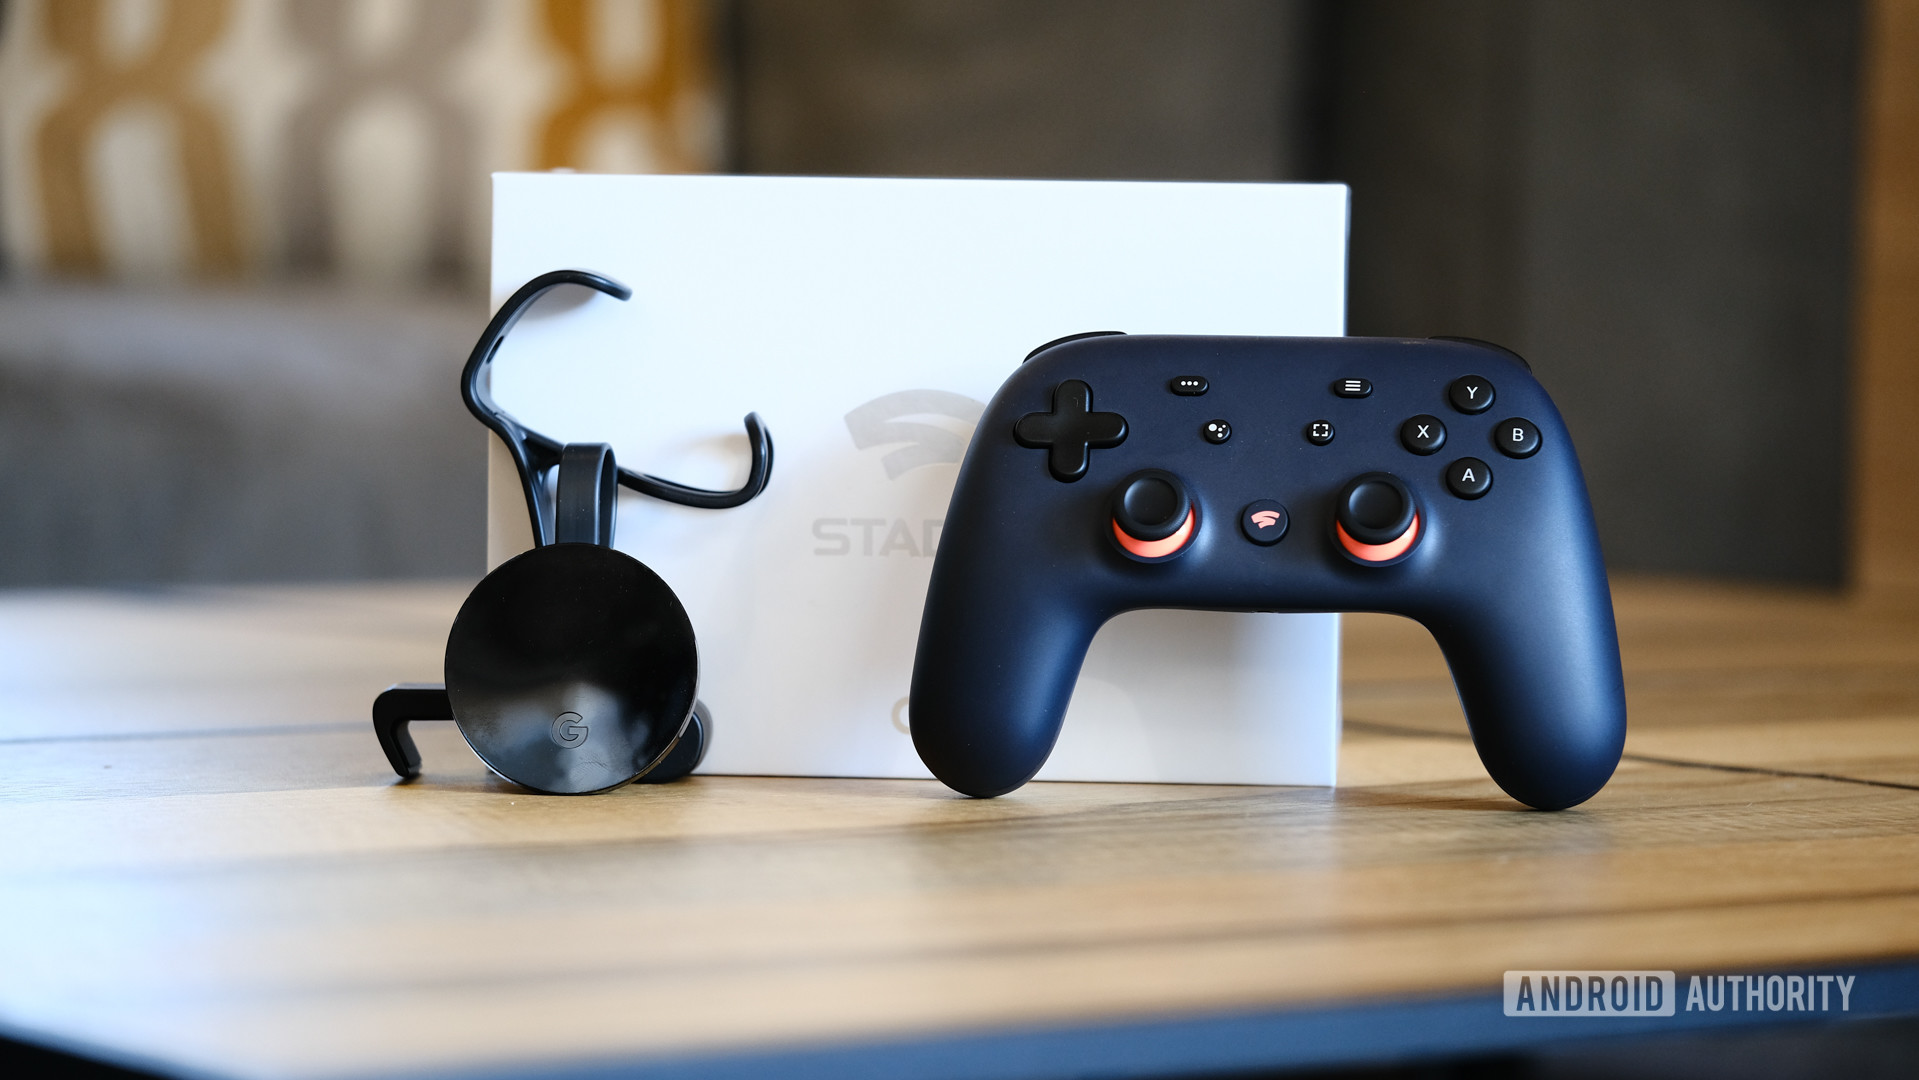 Google Stadia founders edition in the box